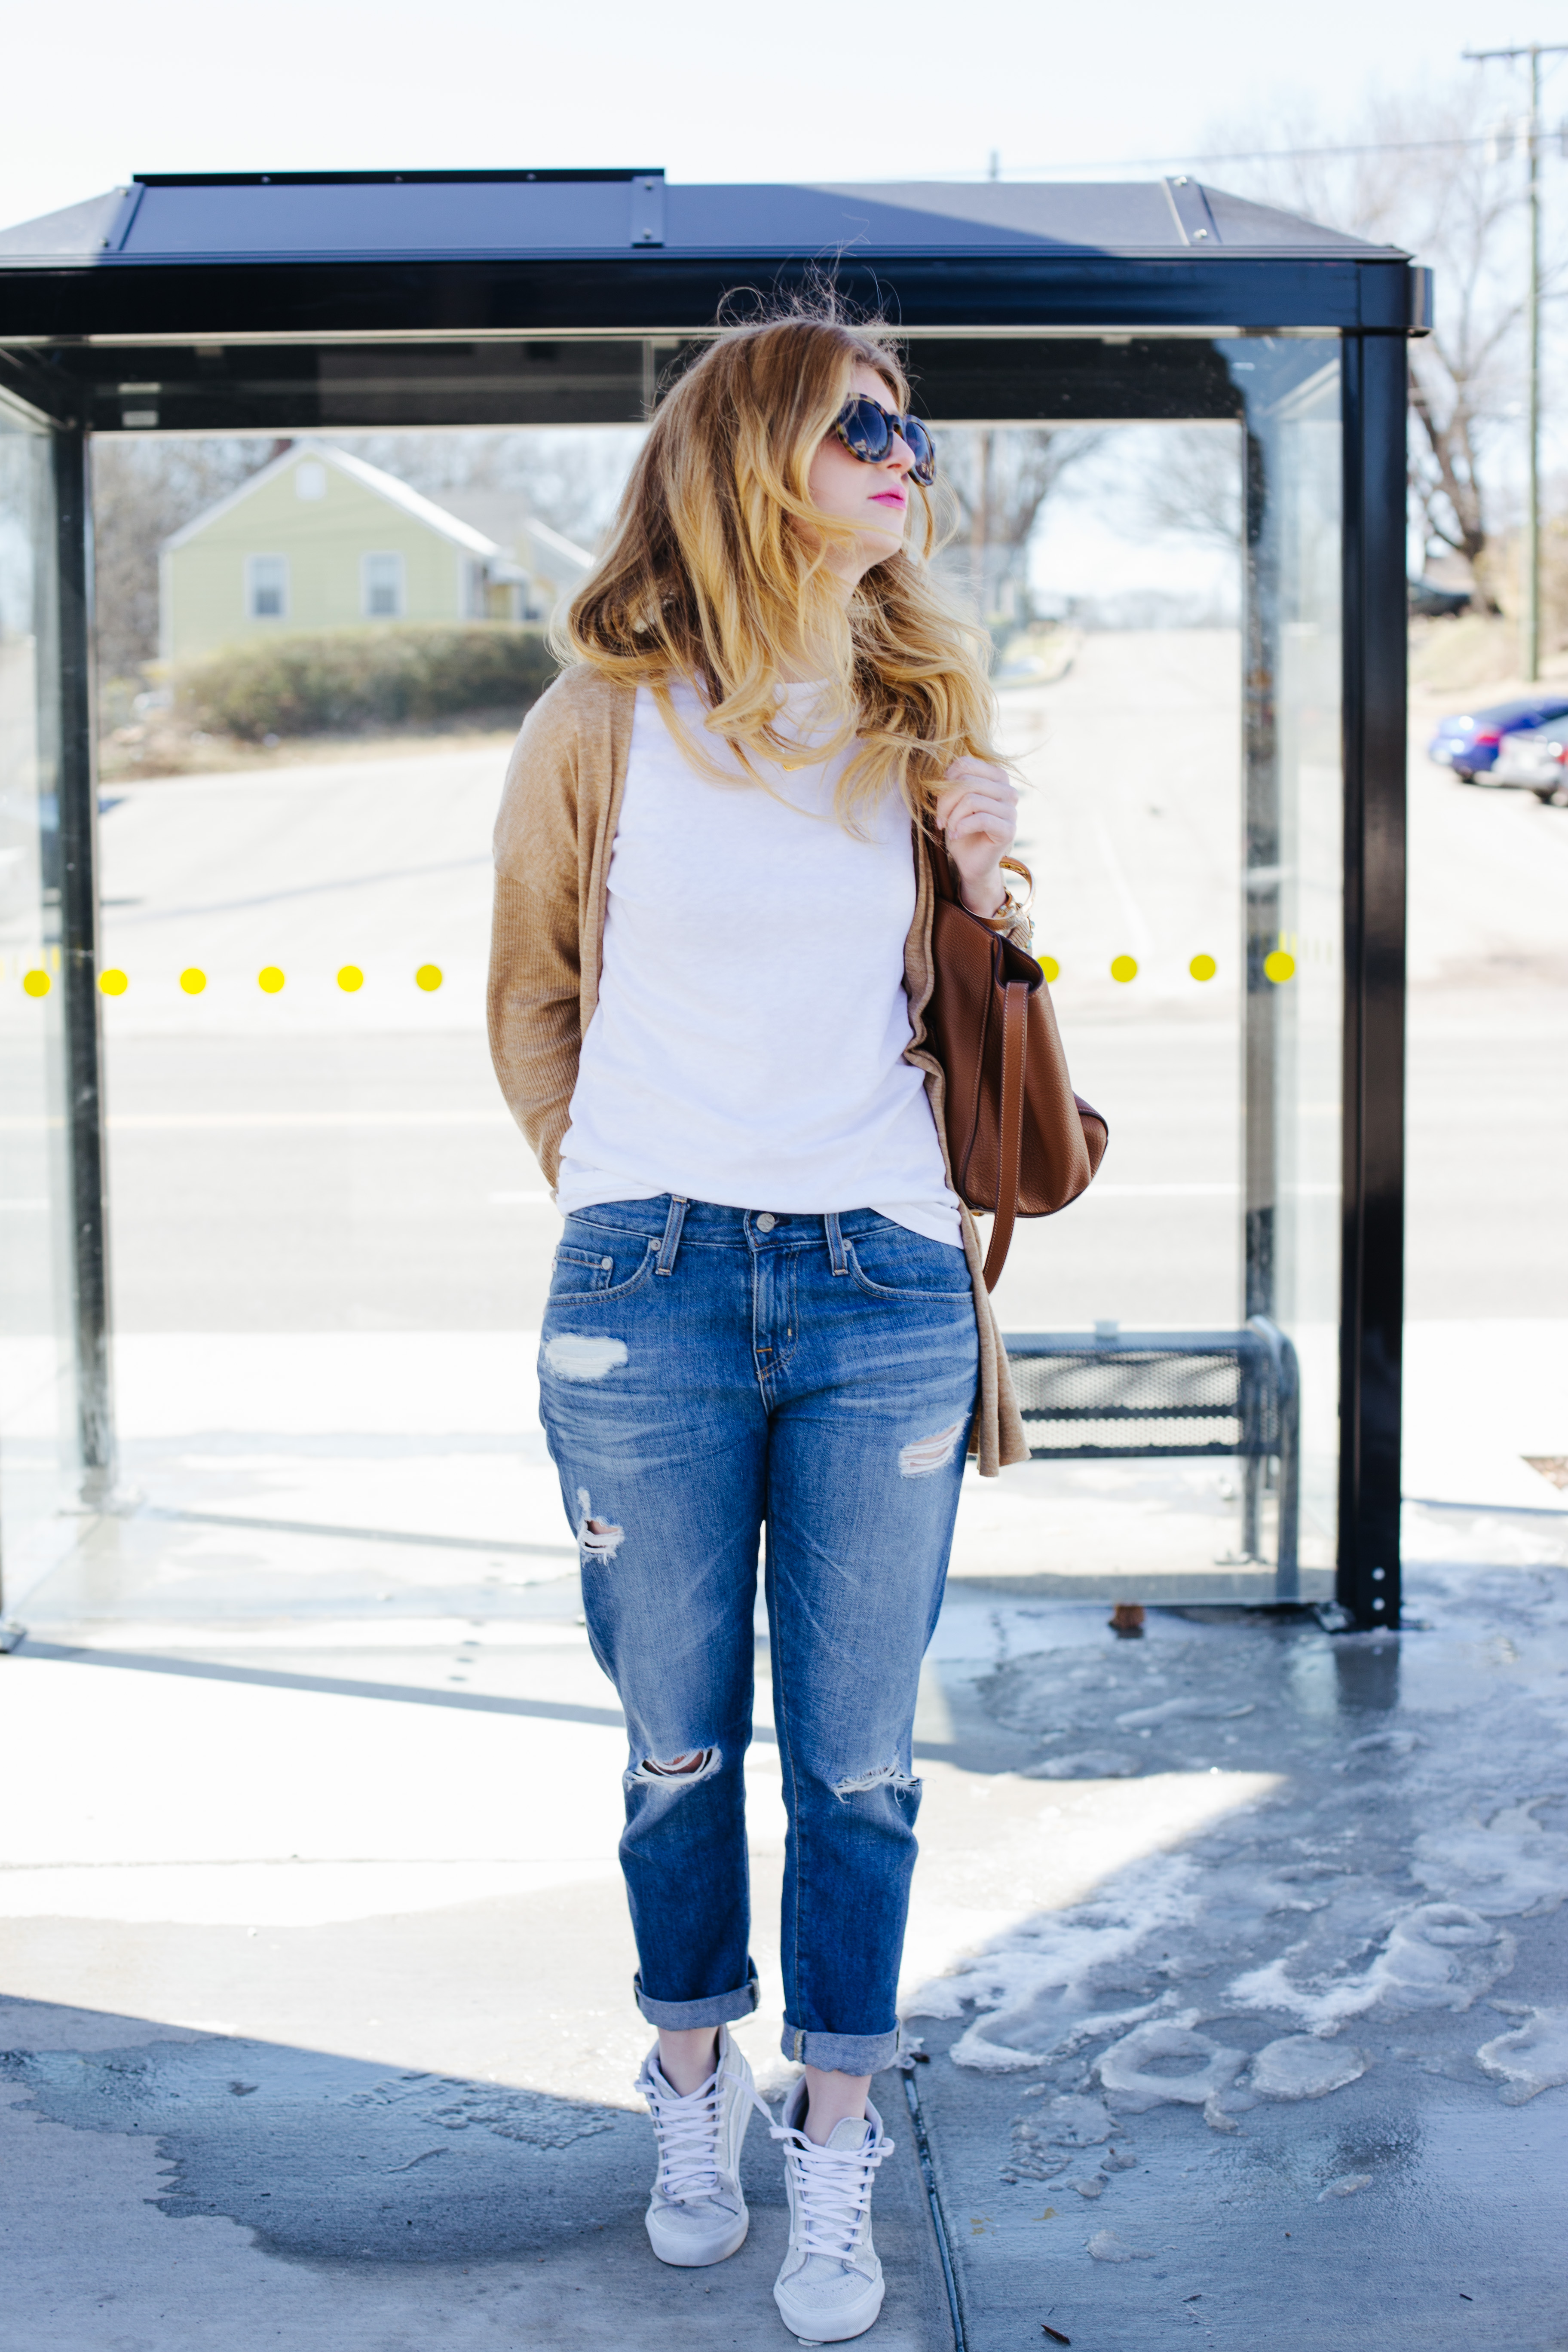 vans and jeans outfit